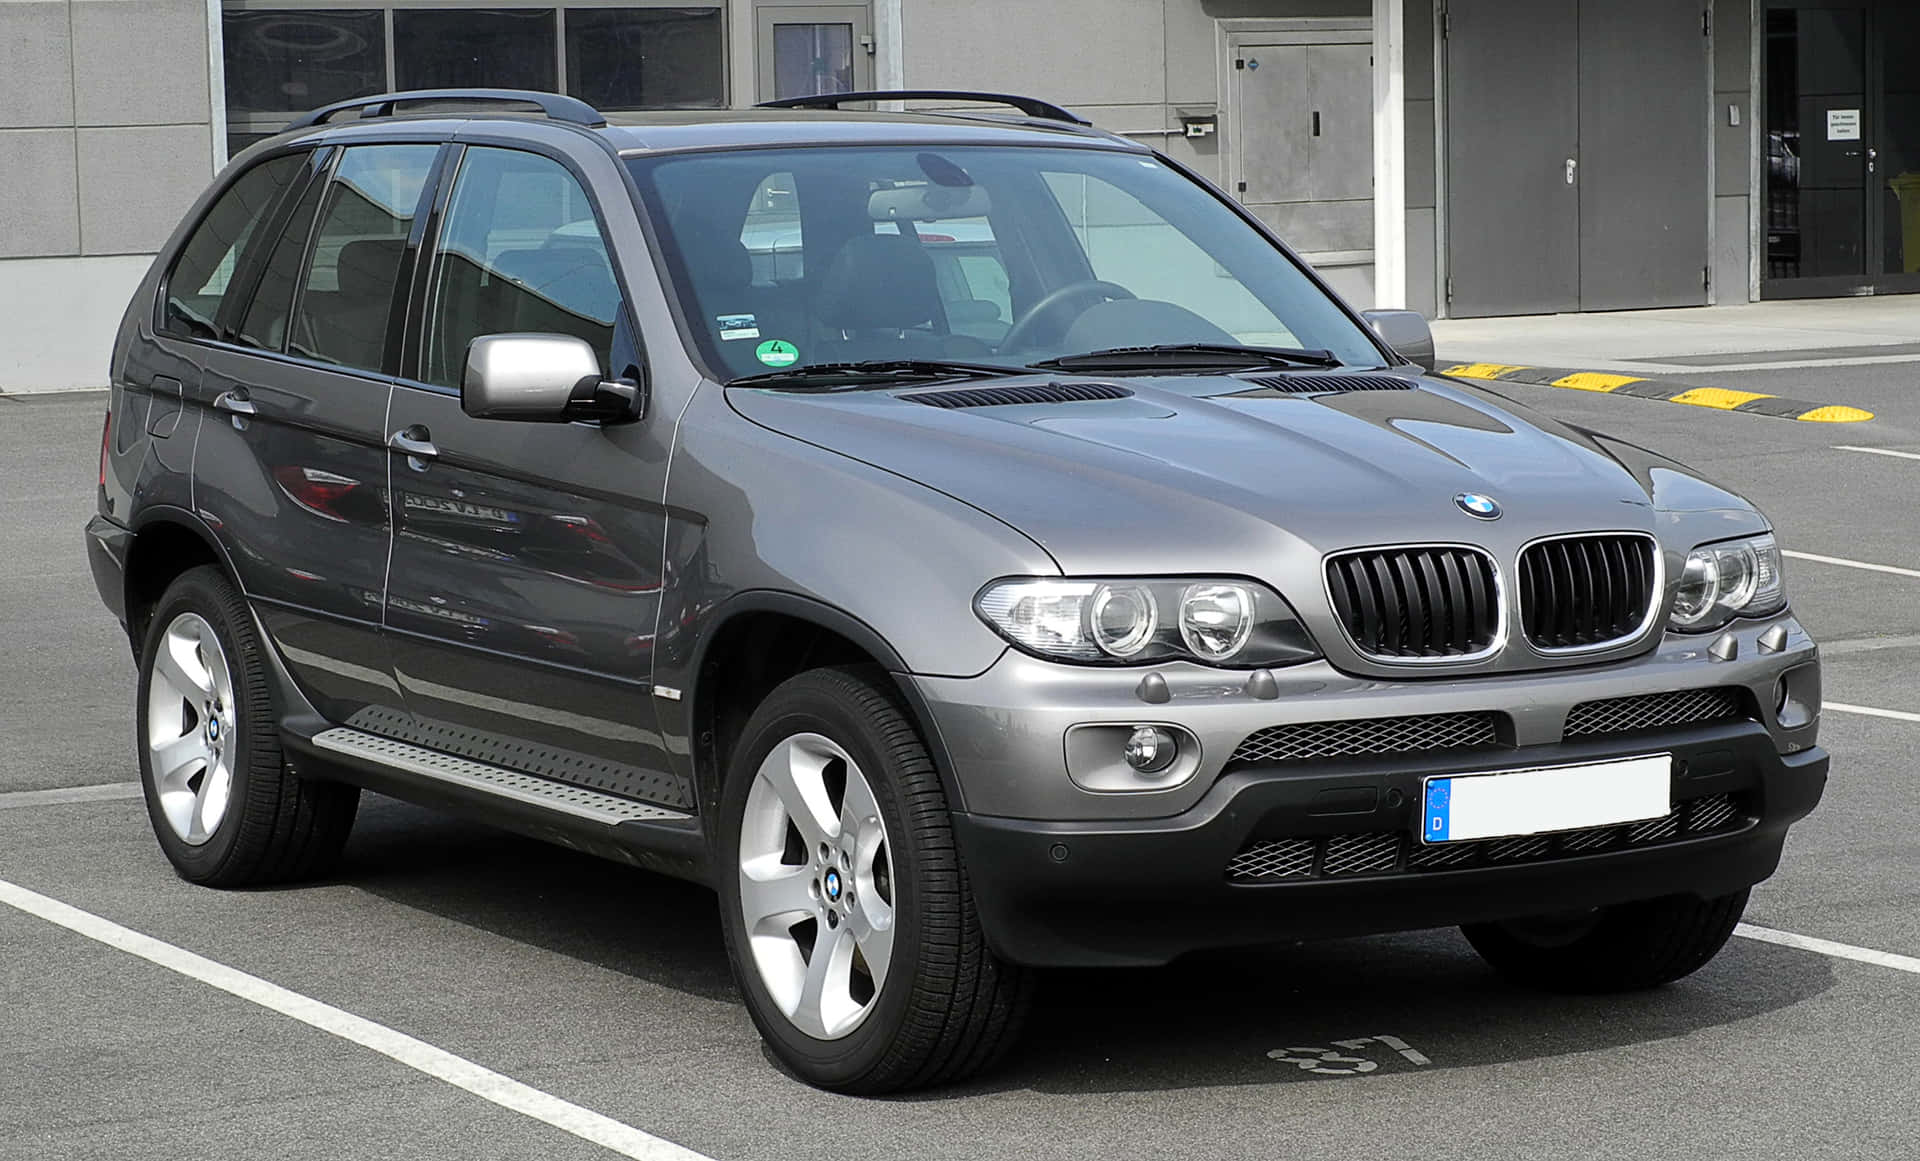 Stunning BMW X5 on the Road Wallpaper